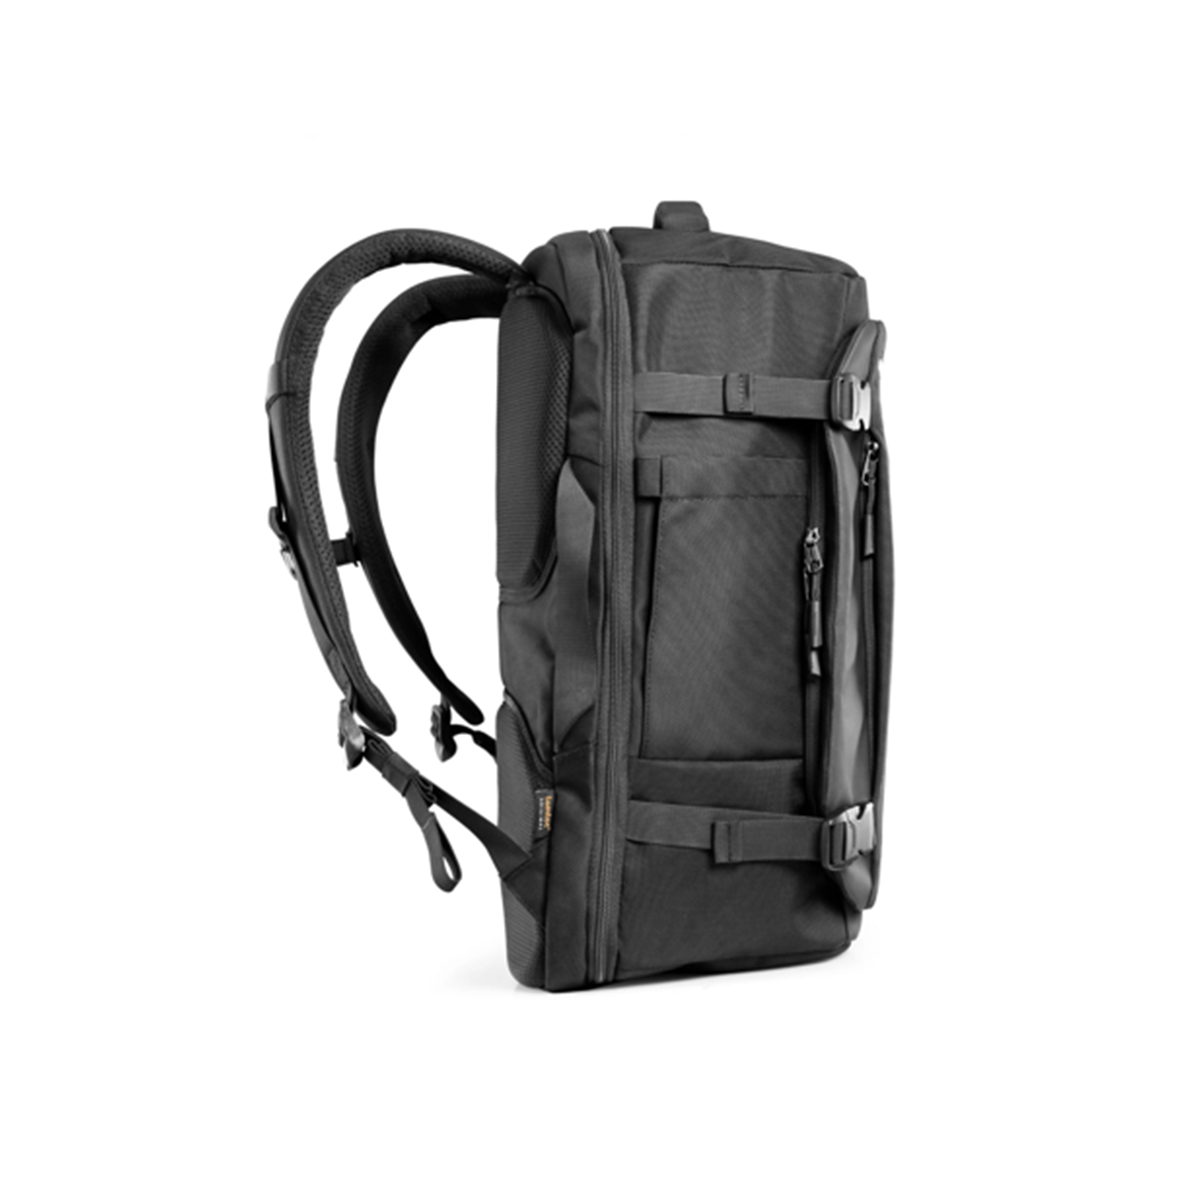  BALO TOMTOC (USA) TRAVEL BACKPACK 40L 